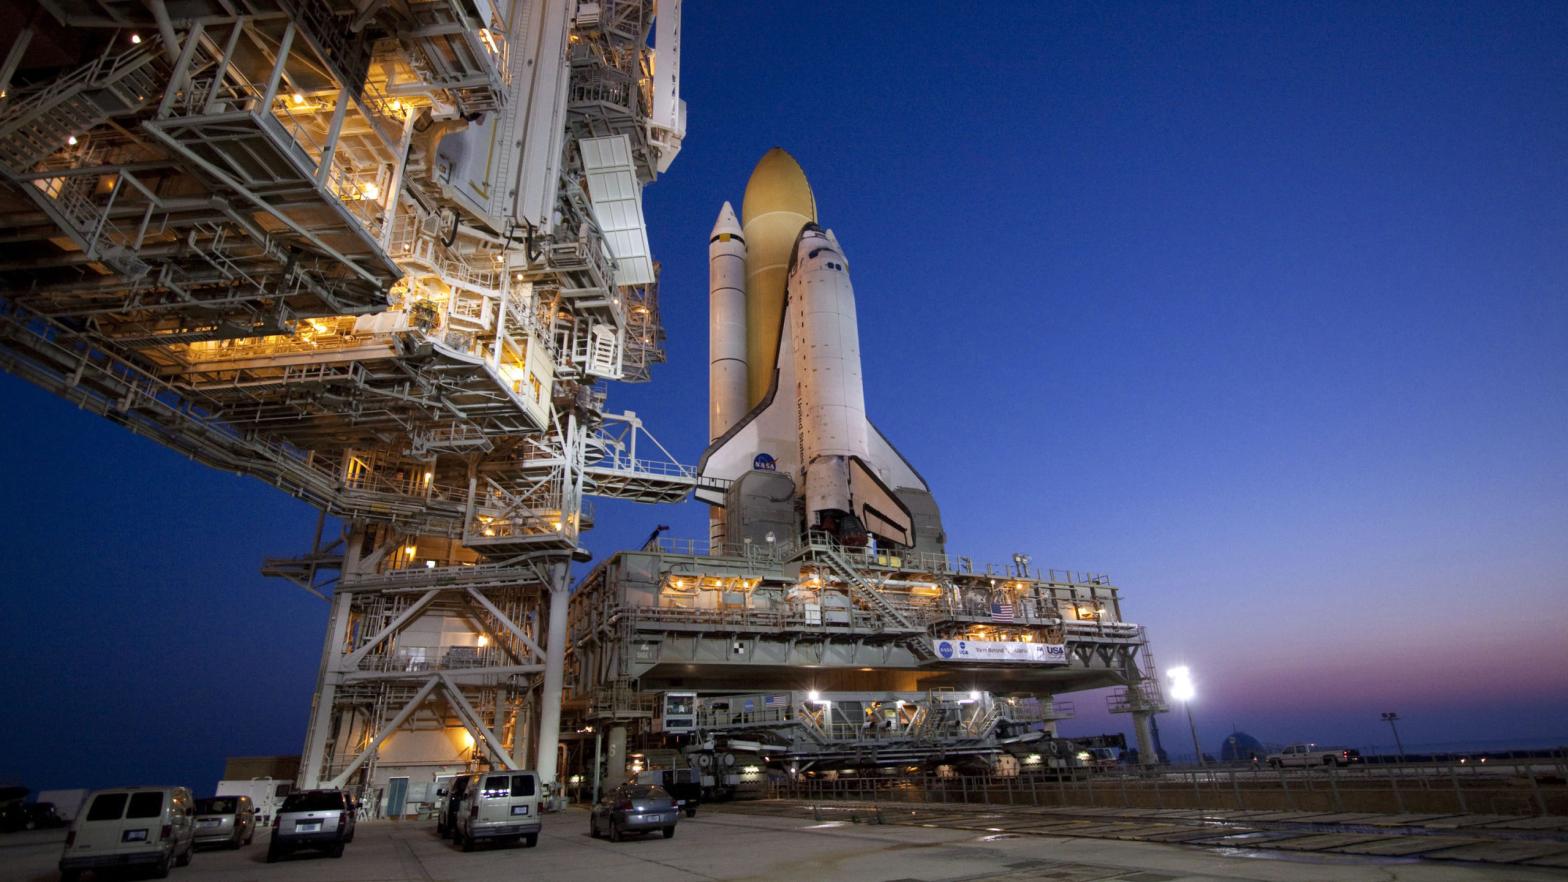 The space shuttle Atlantis on Mobile Launcher Platform-2 prior to launch on May 14, 2010.  (Image: NASA)